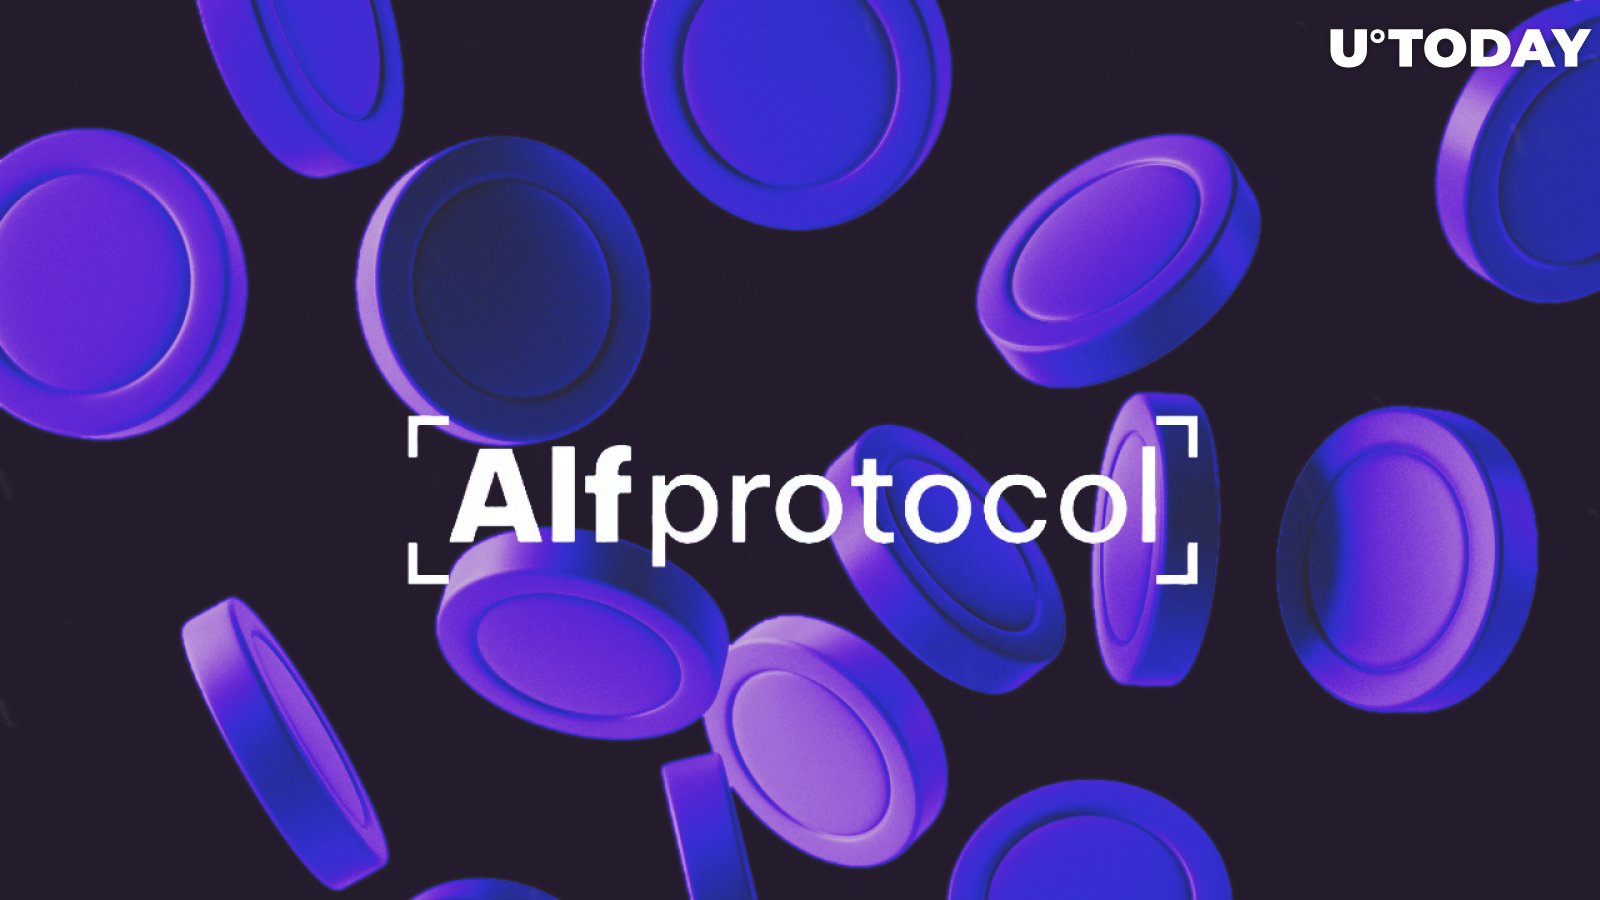 Alfprotocol Shares Its Solana-Based Yield Farming as Part of DeFi Package